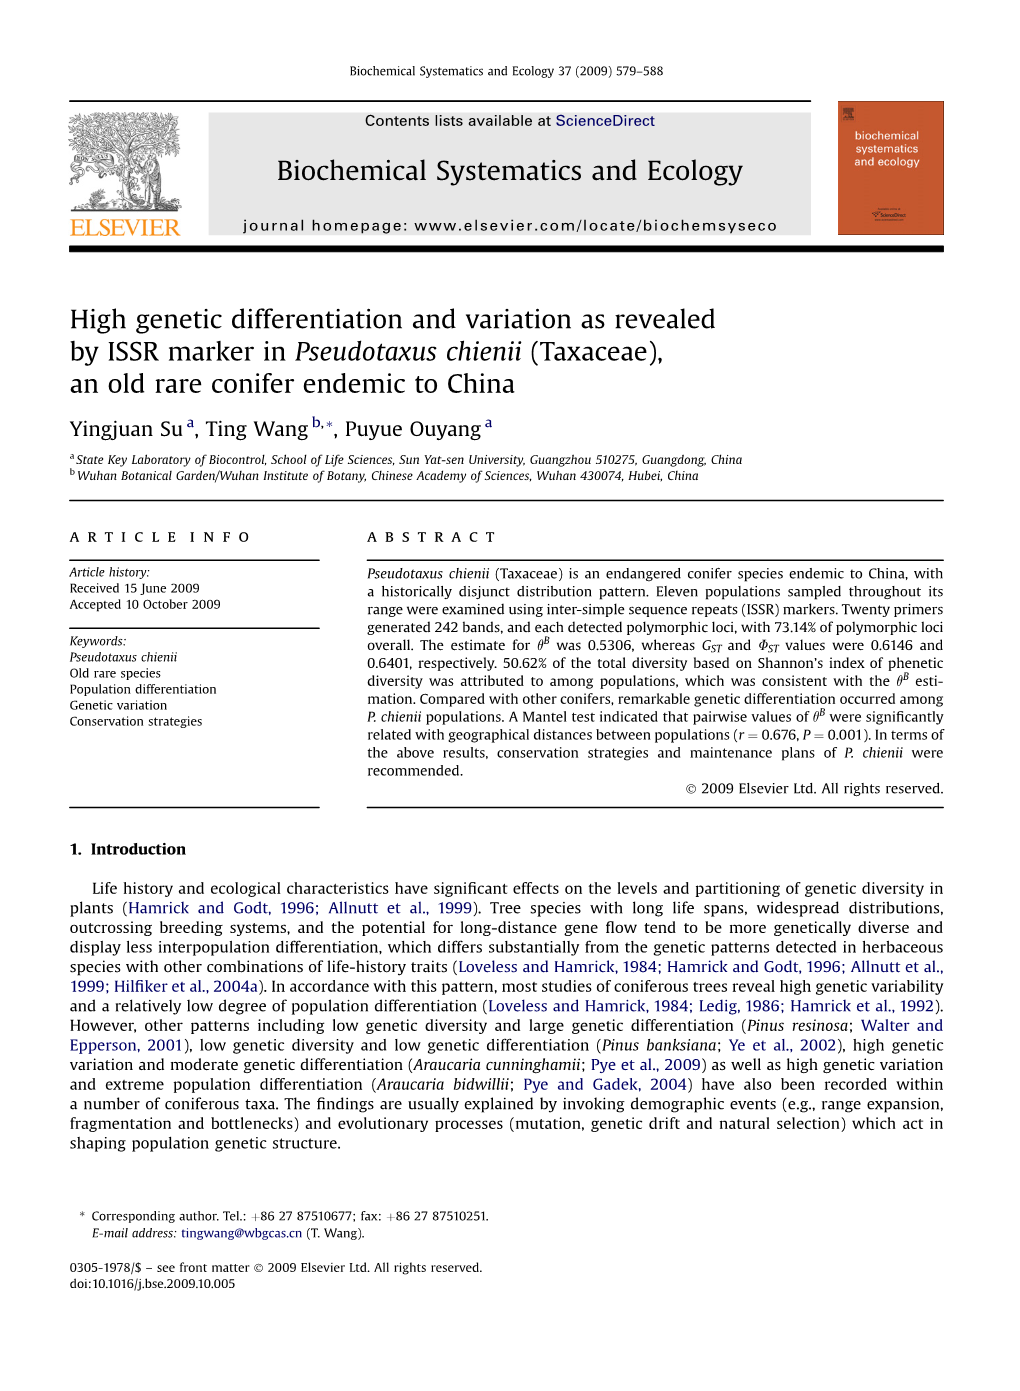 High Genetic Differentiation and Variation As Revealed by ISSR Marker in Pseudotaxus Chienii (Taxaceae), an Old Rare Conifer Endemic to China